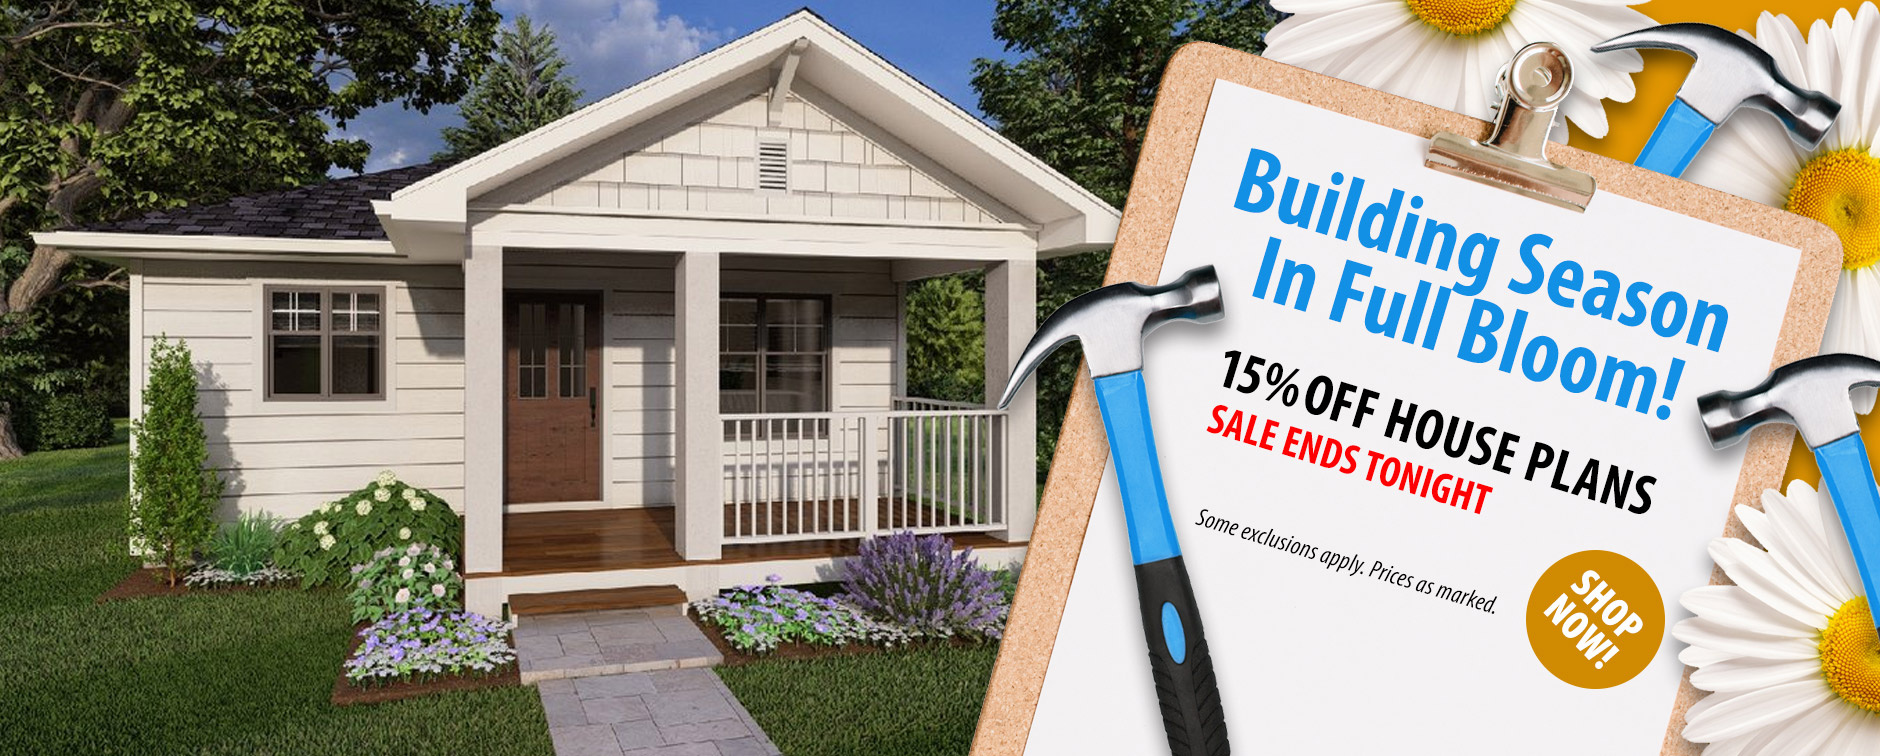 The Builder House Plan Spring Planning Sale Ends Tonight